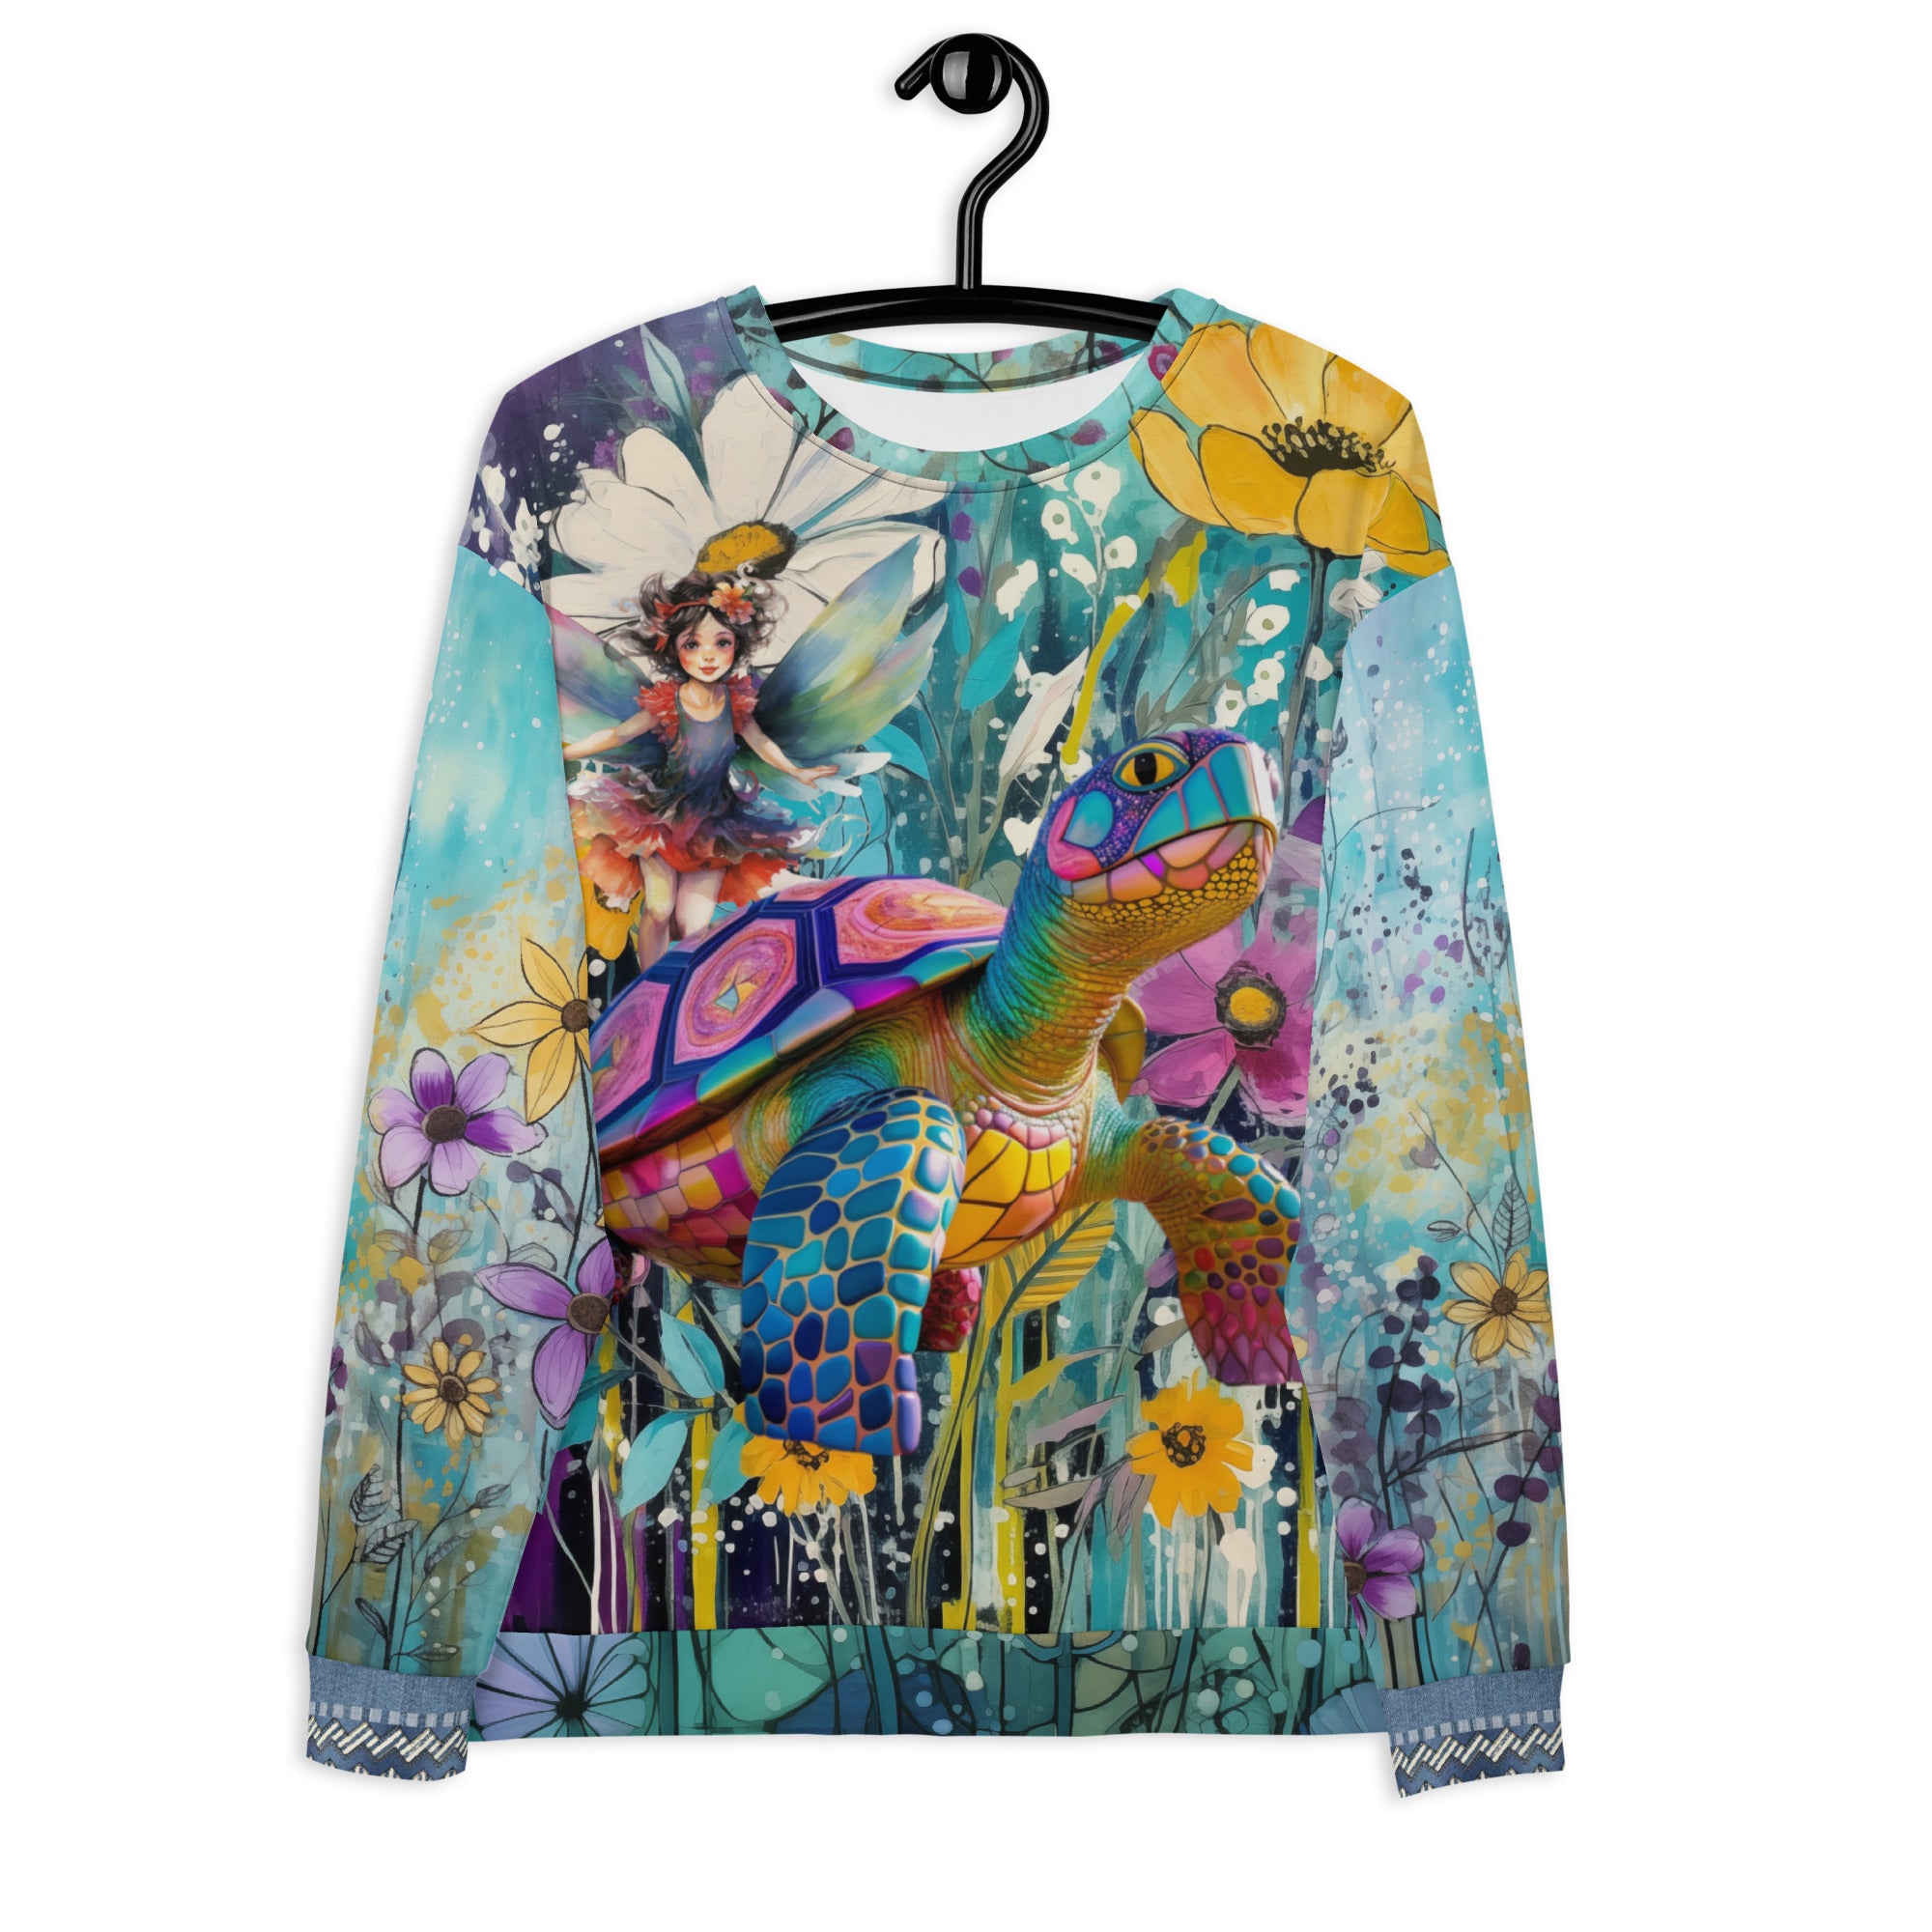 Garden Fairy Goes for a Ride Eco-Poly Summer Weight Unisex Sweatshirt